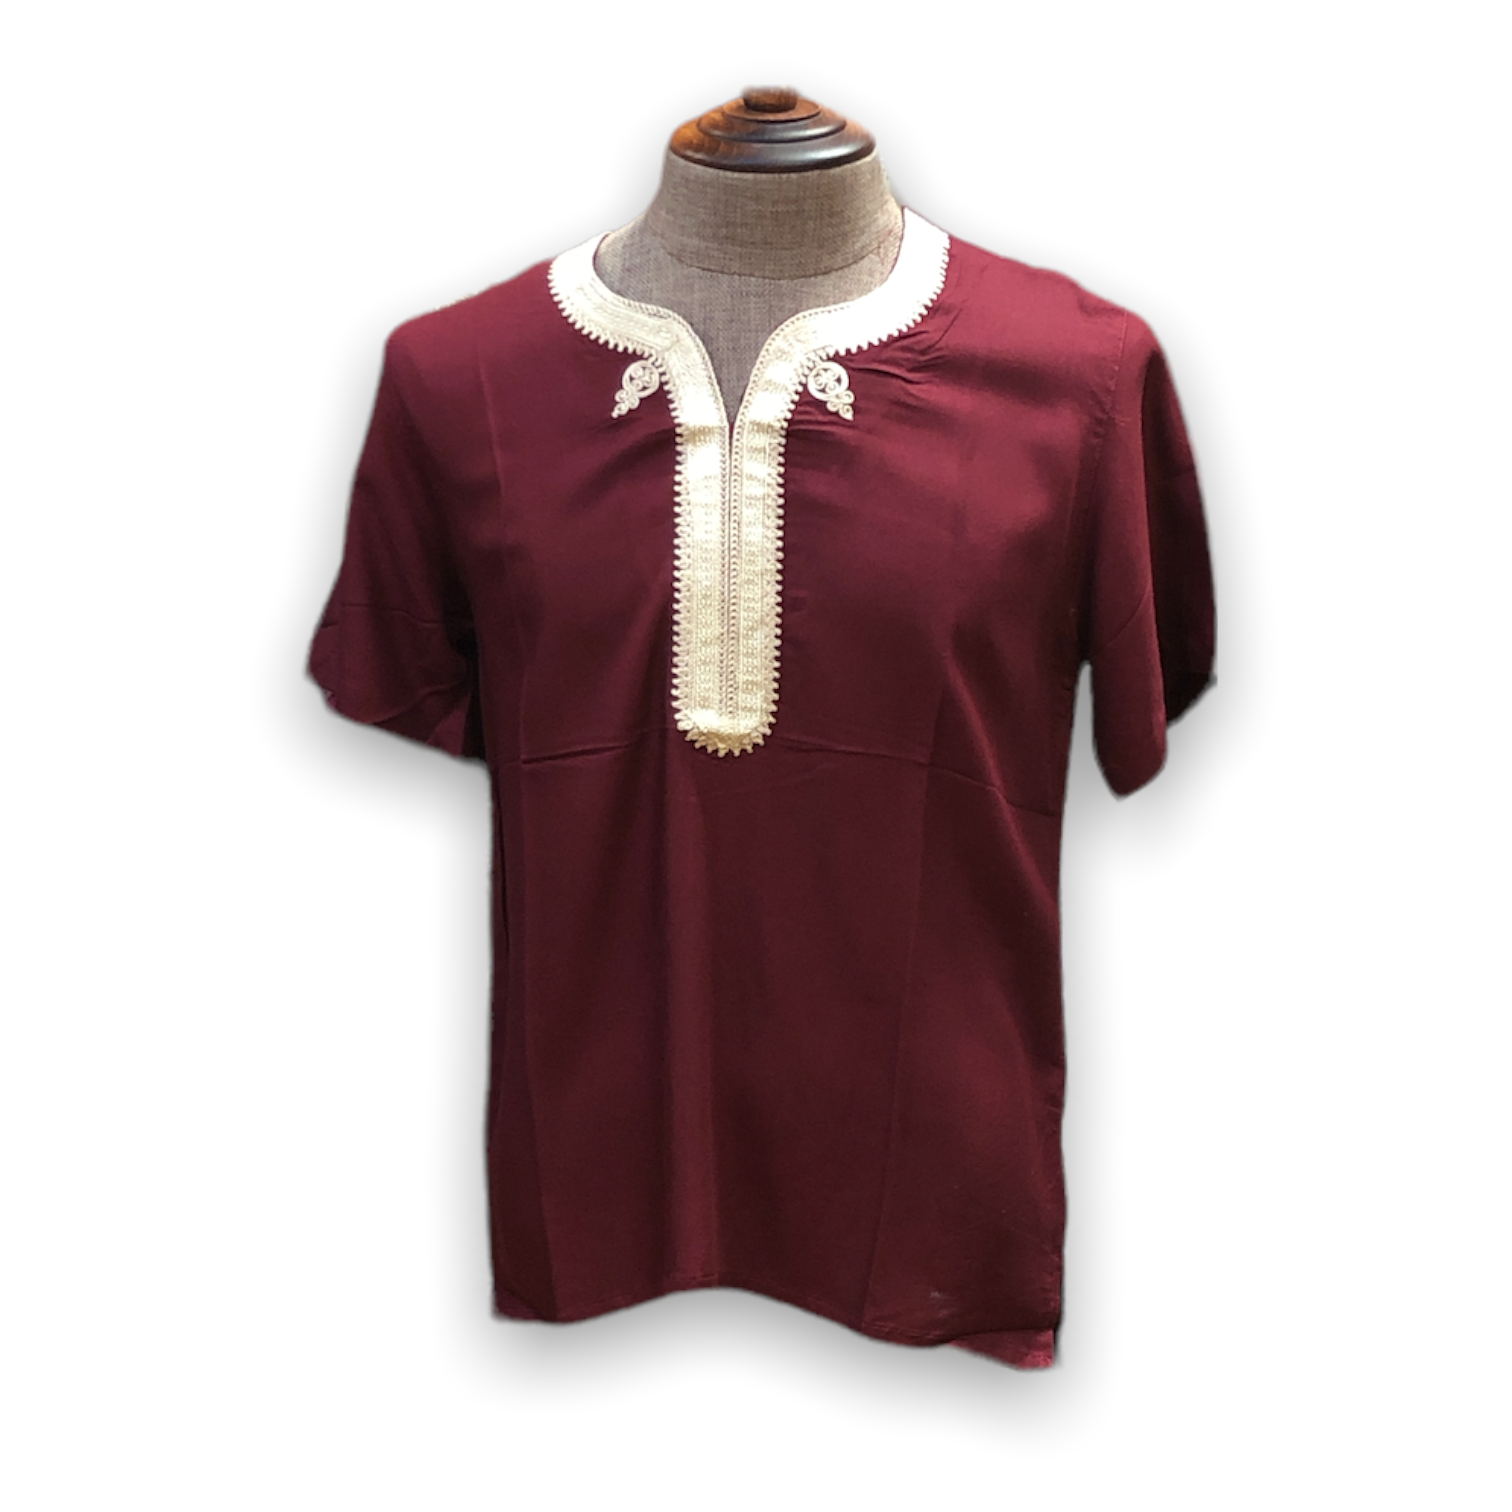 Men's Budget Friendly Short Sleeved Cotton Caftan T-Shirt with Embroidery